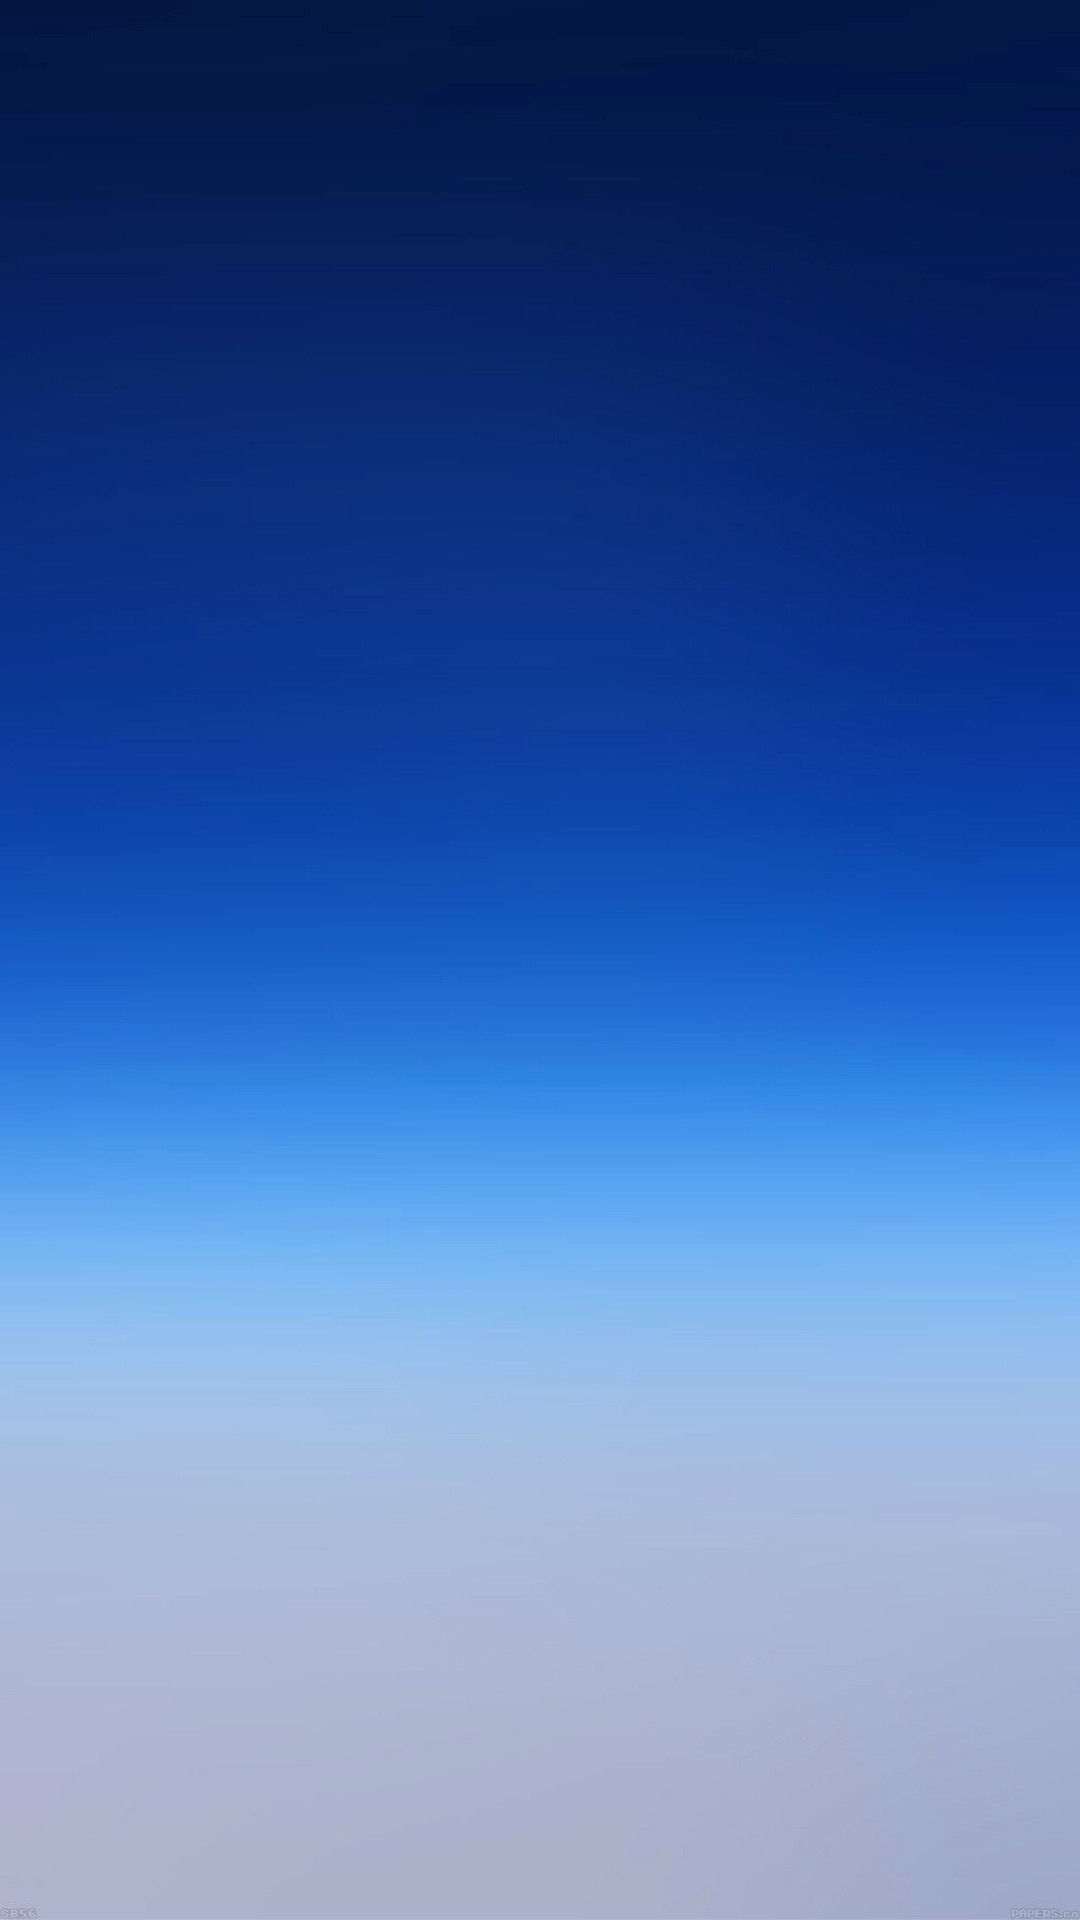 1080x1920, Iphone 5 Wallpaper One Color Blue Iphone - Iphone Wallpaper Blue - HD Wallpaper 